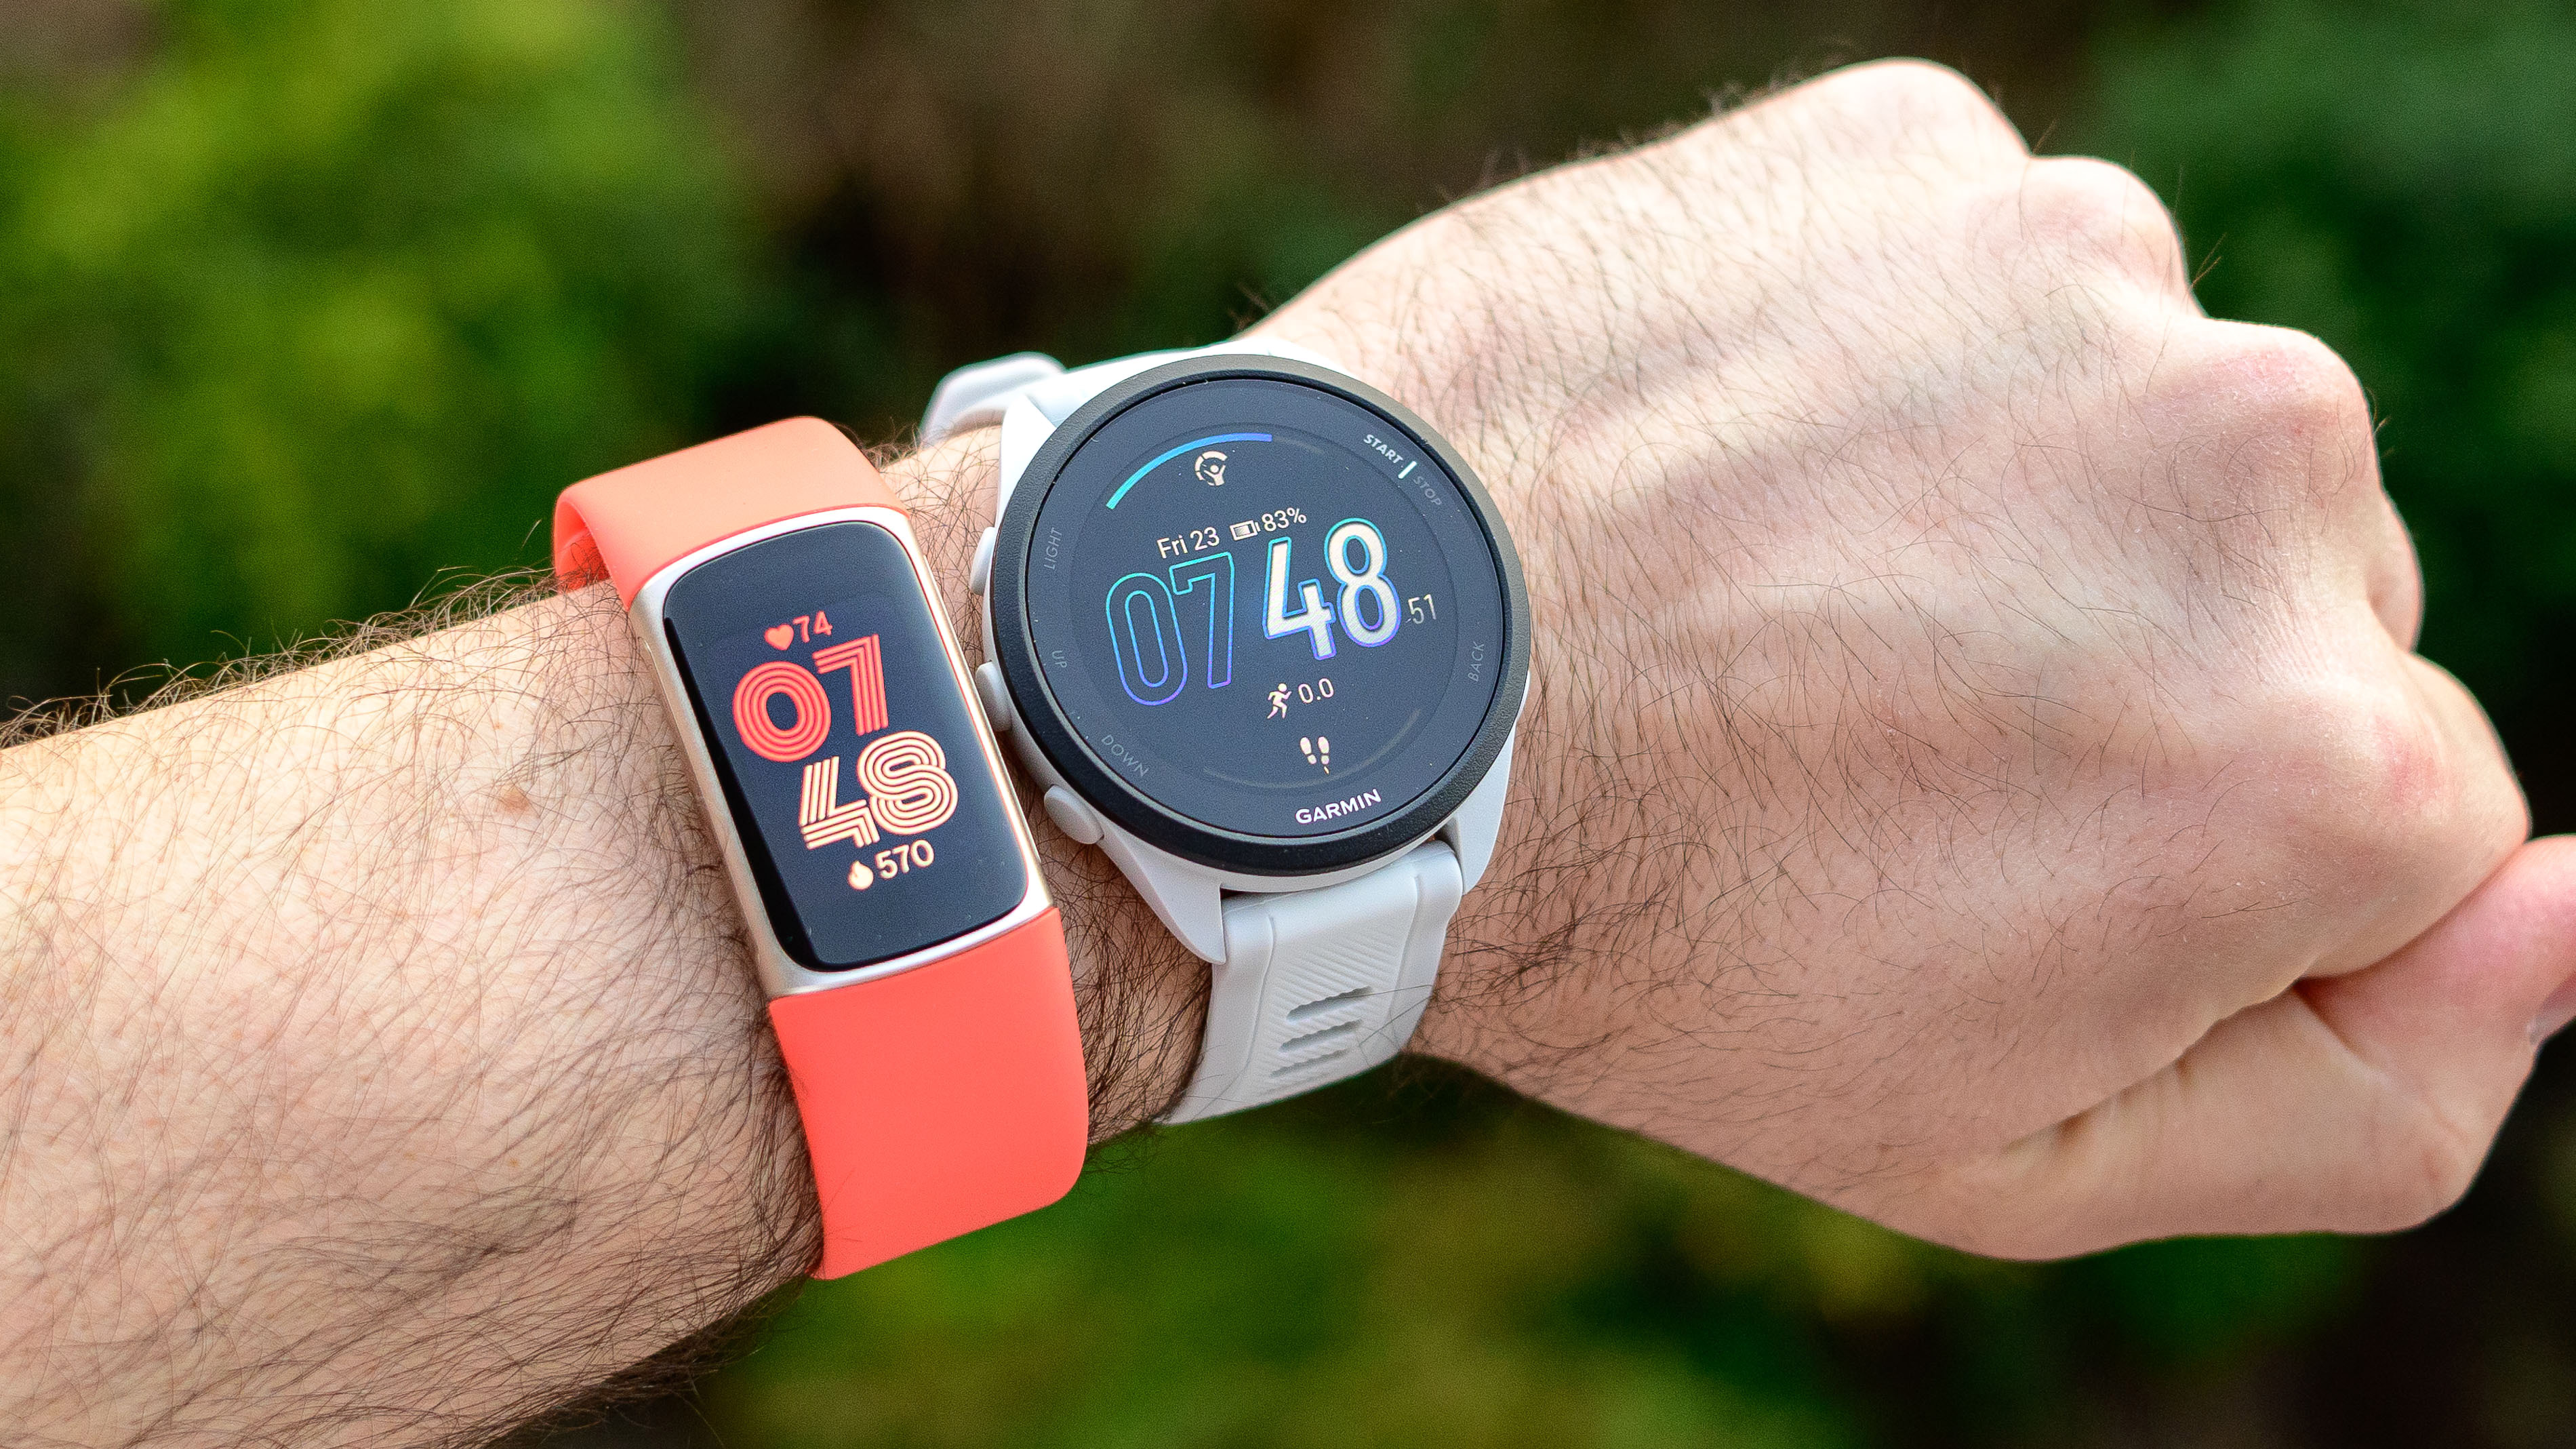 Garmin Forerunner 45 Review: 9 New Things To Know // Hands-on walk